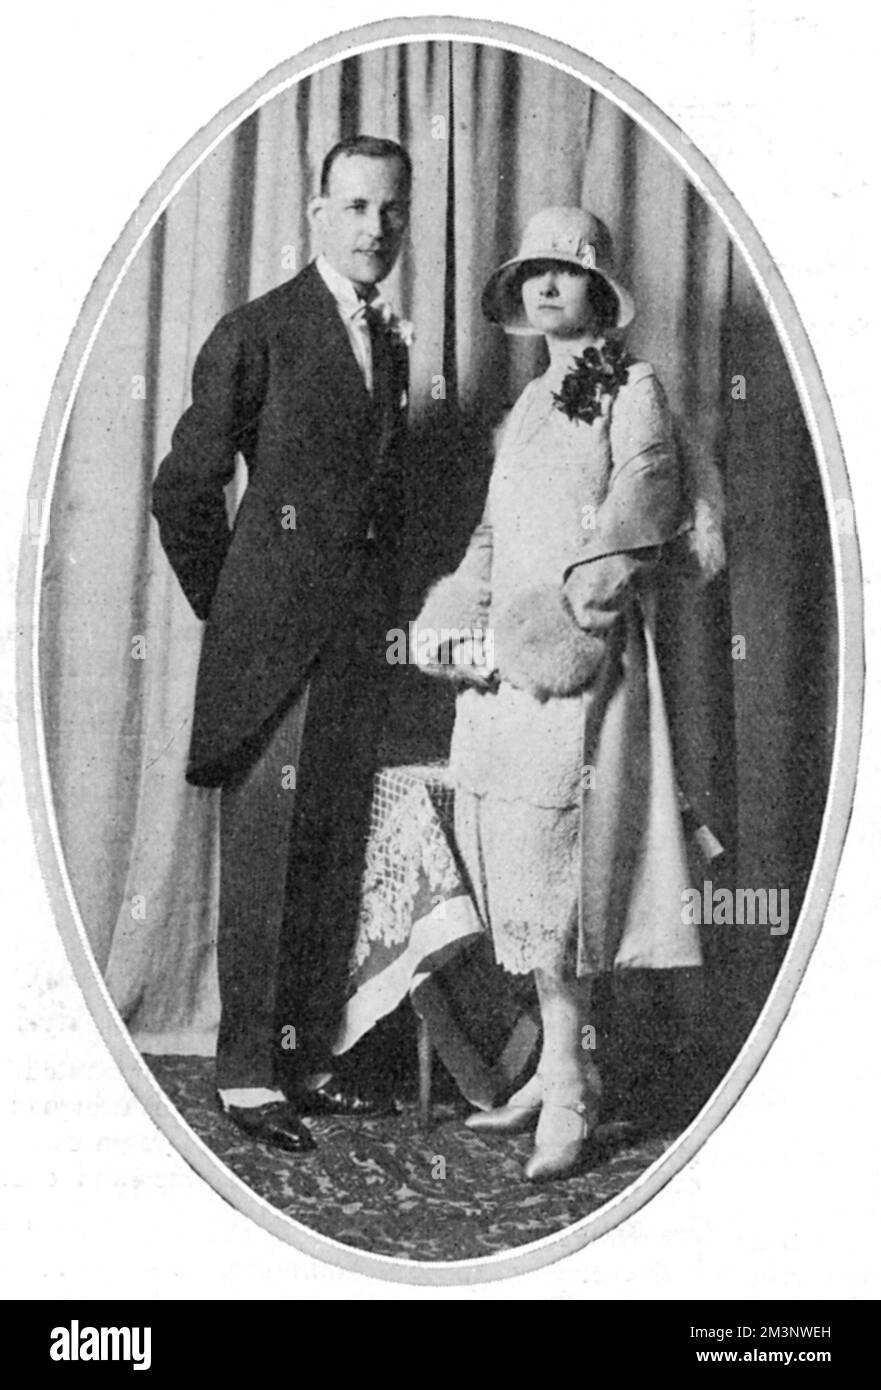 Noel Maskelyne (1902 - 1973), magician, pictured with his bride, Miss Isabel Jenkinson after their wedding at All Souls, Langham Place, London.  Noel was a member of the famous Maskelyne family of magicians.     Date: 1927 Stock Photo